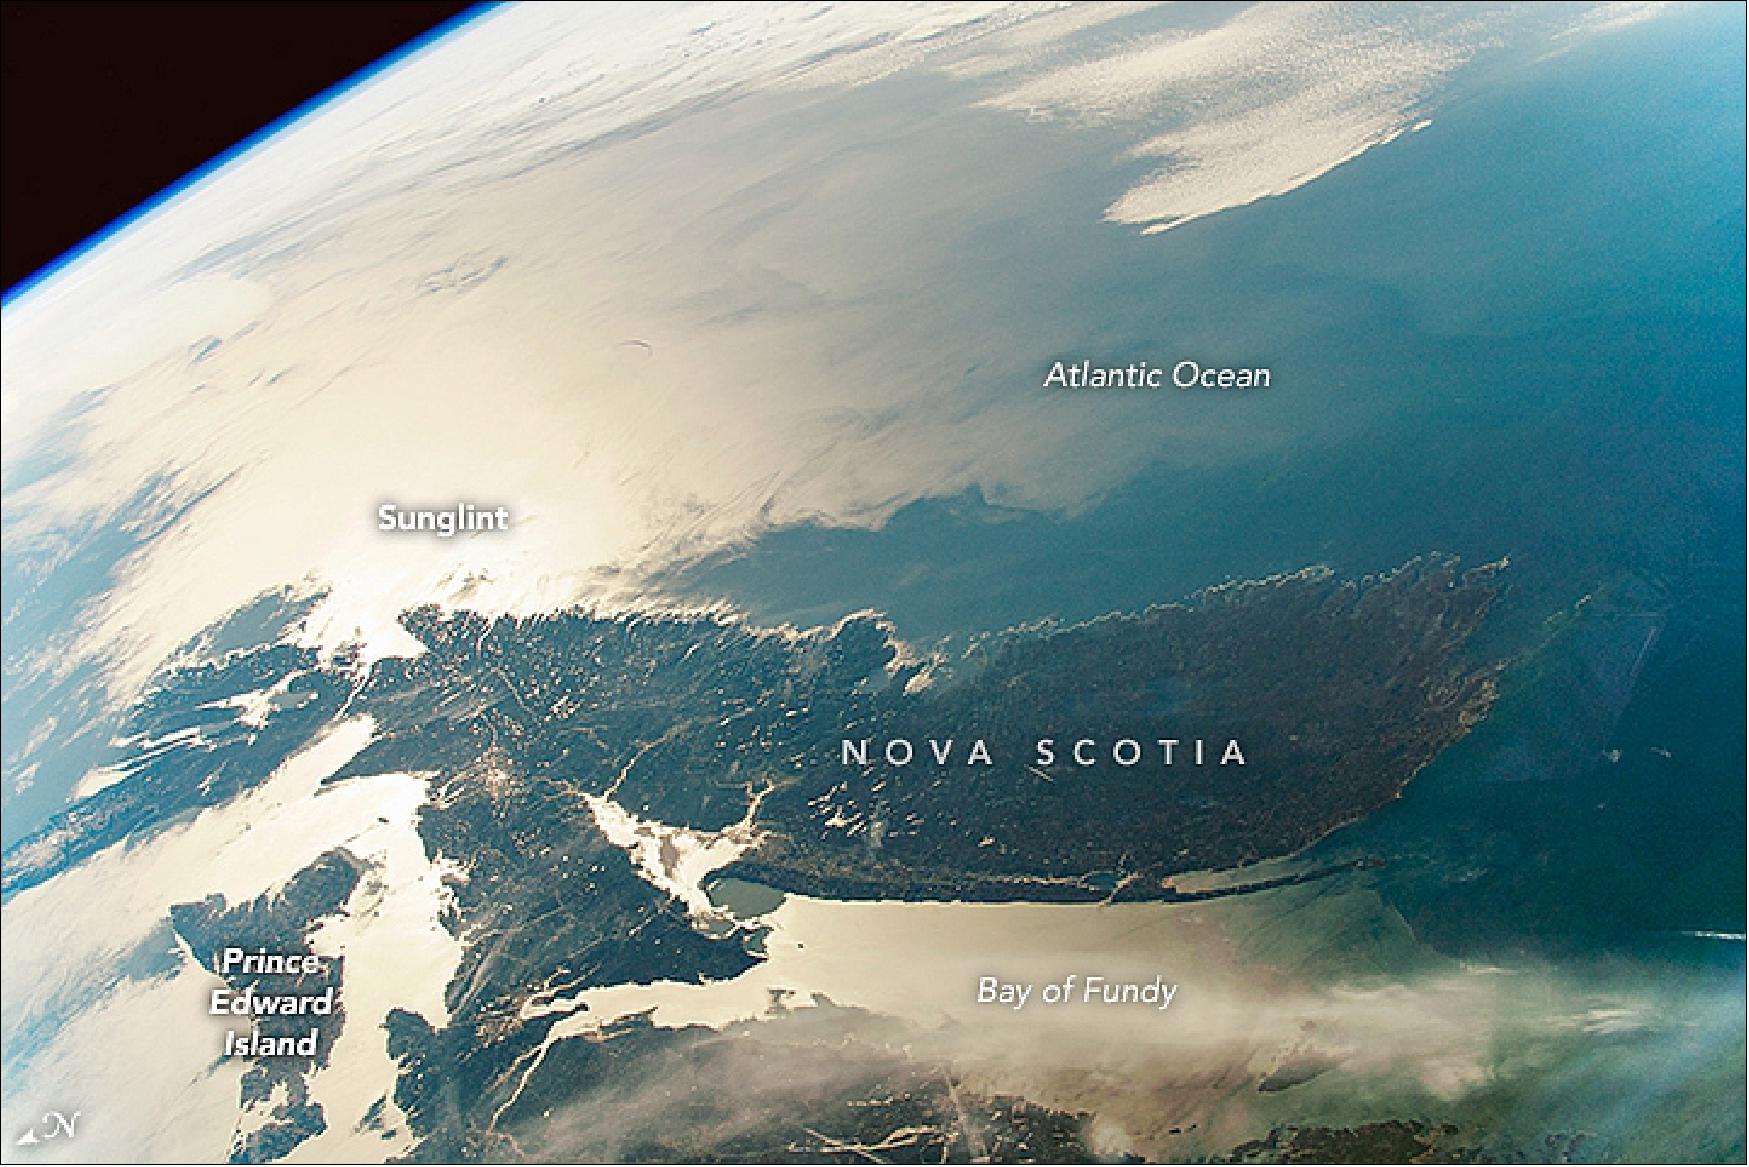 Figure 71: This photograph, observed on 7 May 2019, shows Nova Scotia to the east of the space station, contrasted against the brilliance of the Sun reflecting off of the Atlantic Ocean. “Sunglint” images like this can highlight fine coastline details: Nova Scotia’s shoreline, northern arms of the Bay of Fundy, and the outline of Prince Edward Island (image credit: Astronaut photographs ISS059-E-59135 and ISS059-E-52689 were acquired on 7 May 2019, with a Nikon D5 digital camera using 50 mm and 35 mm lenses (respectively) and are provided by the ISS Crew Earth Observations Facility and the Earth Science and Remote Sensing Unit, Johnson Space Center. The images were taken by a member of the Expedition 59 crew. Caption by M. Justin Wilkinson and Susan Runco)